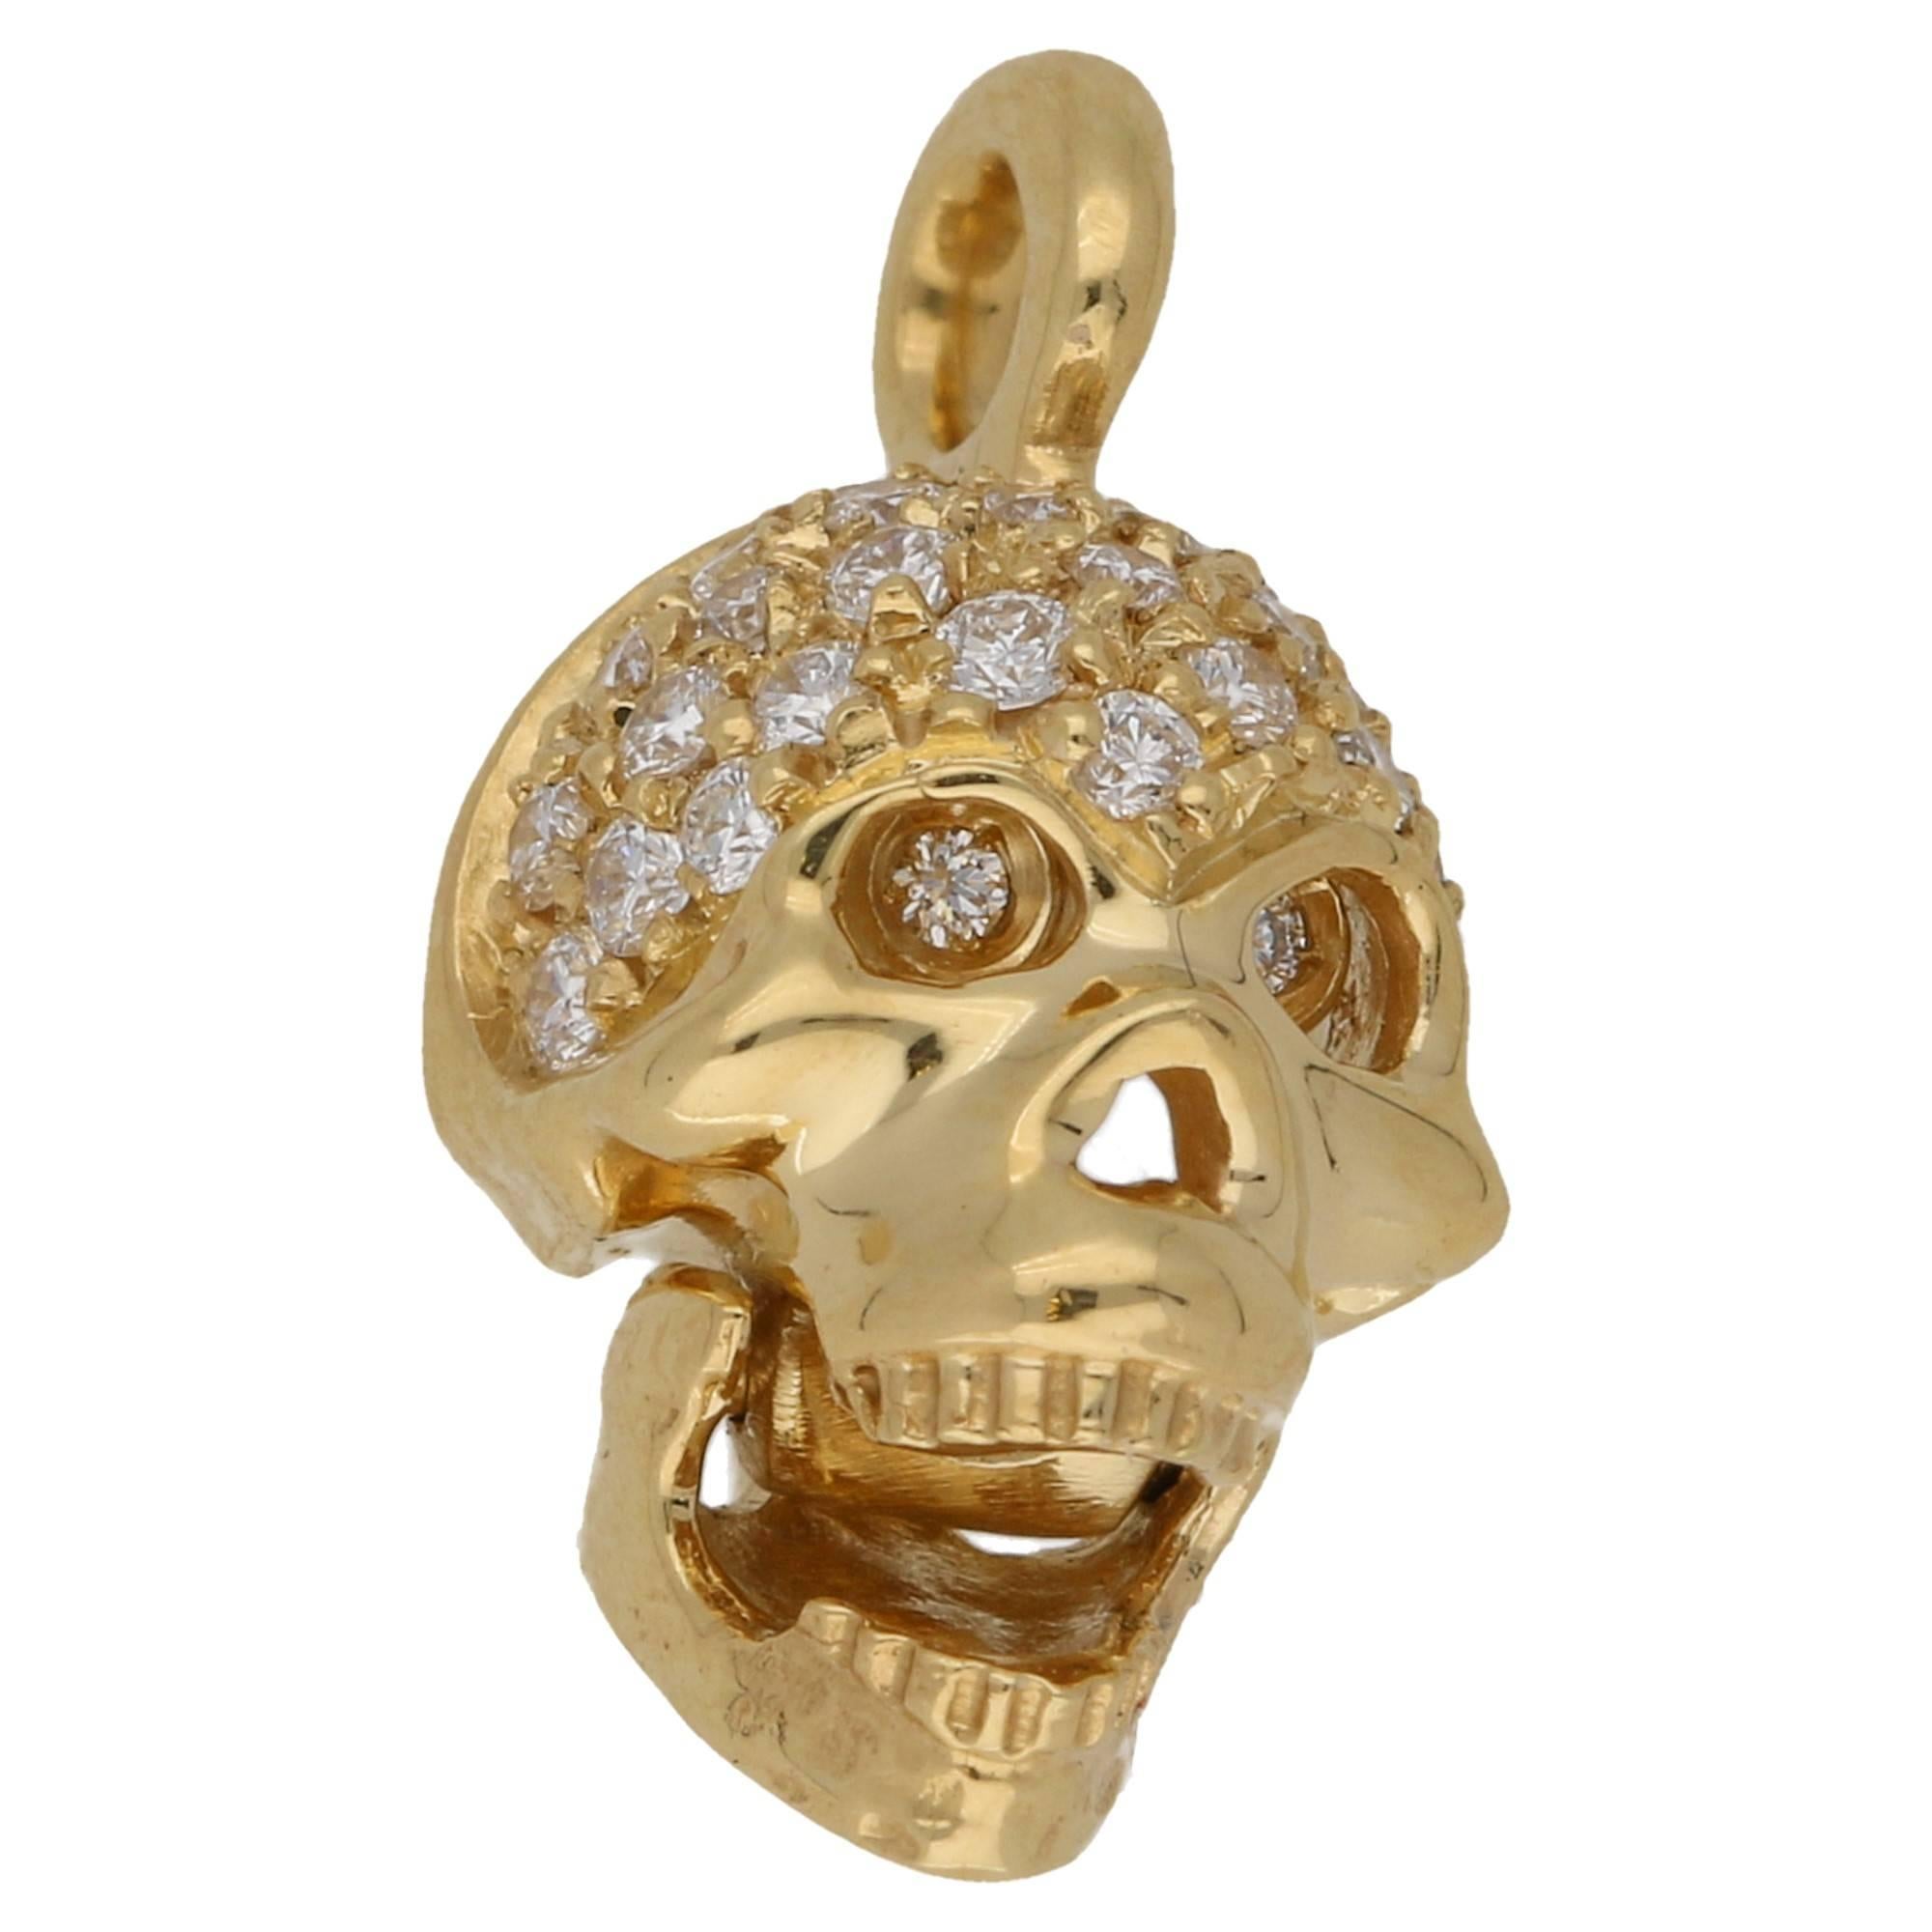 A fantastic 18ct yellow gold skull pendant with a pave set diamond skull and a hinged jaw that opens to cause the skull's diamond set eyes to pop out! Diamond weight: 0.28ct G/Vs. The pendant is 15mm in length and 8mm in width.